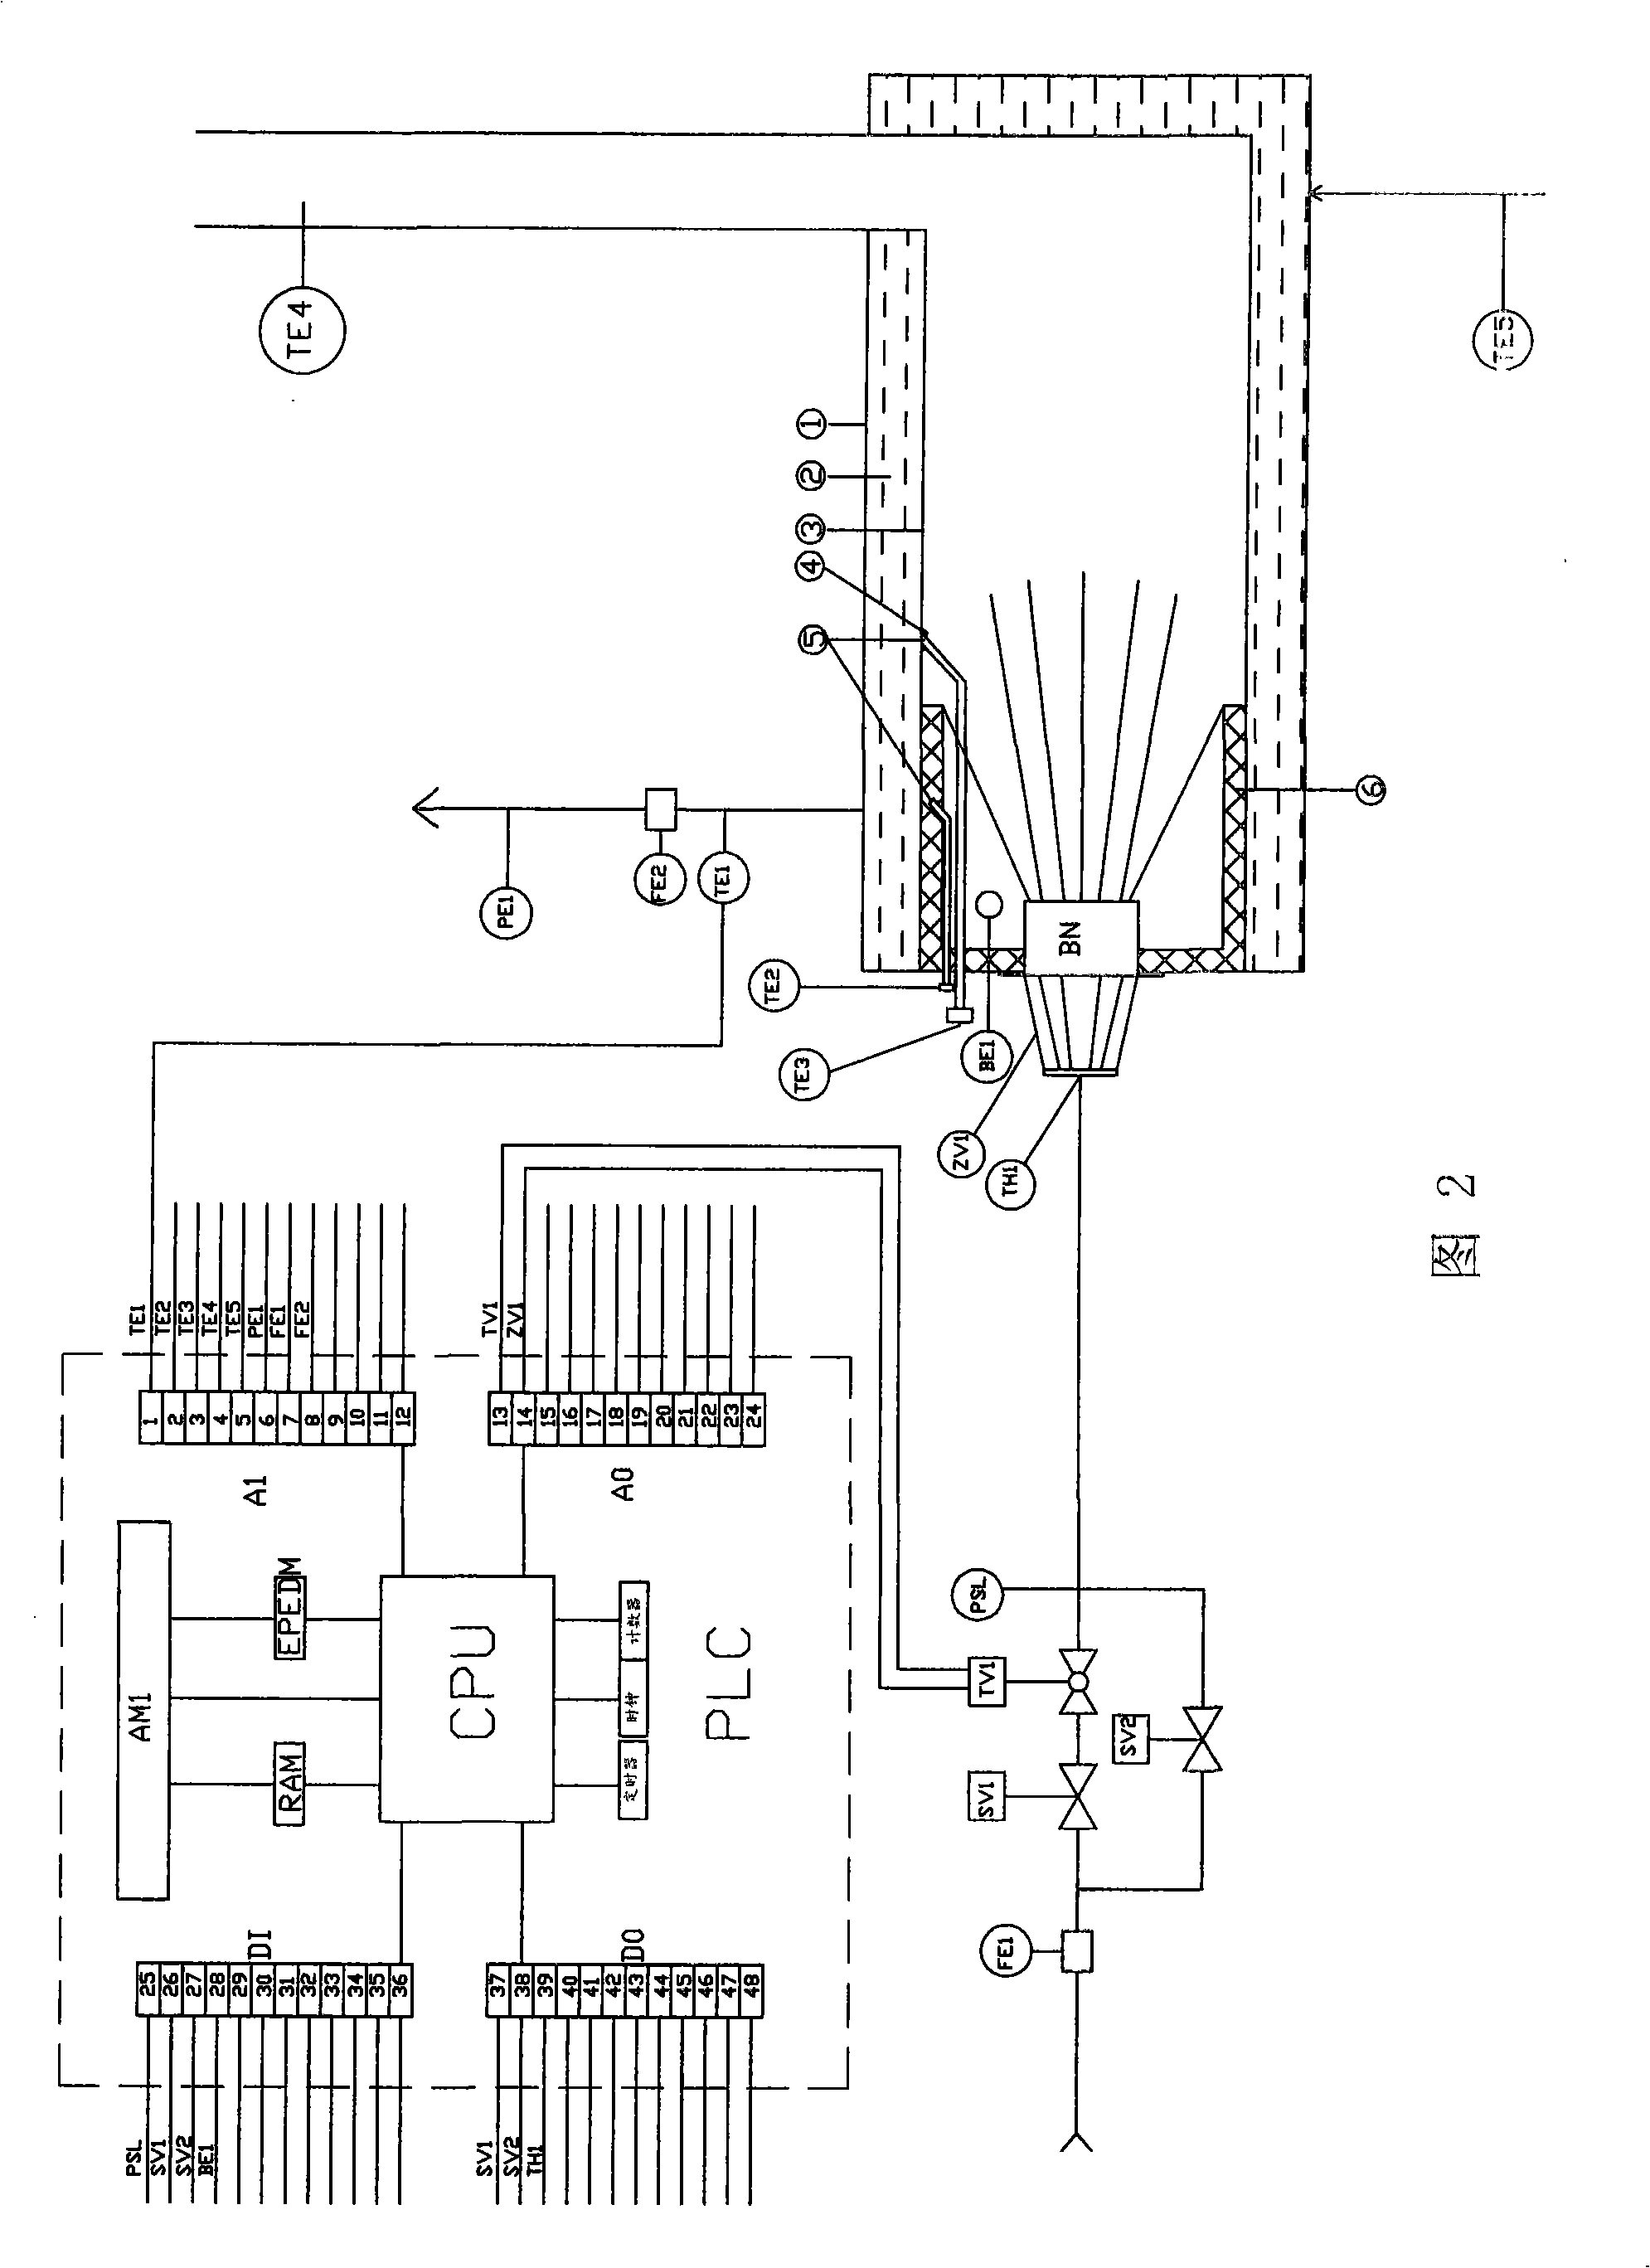 Full-automatic control system of oil field heating furnace